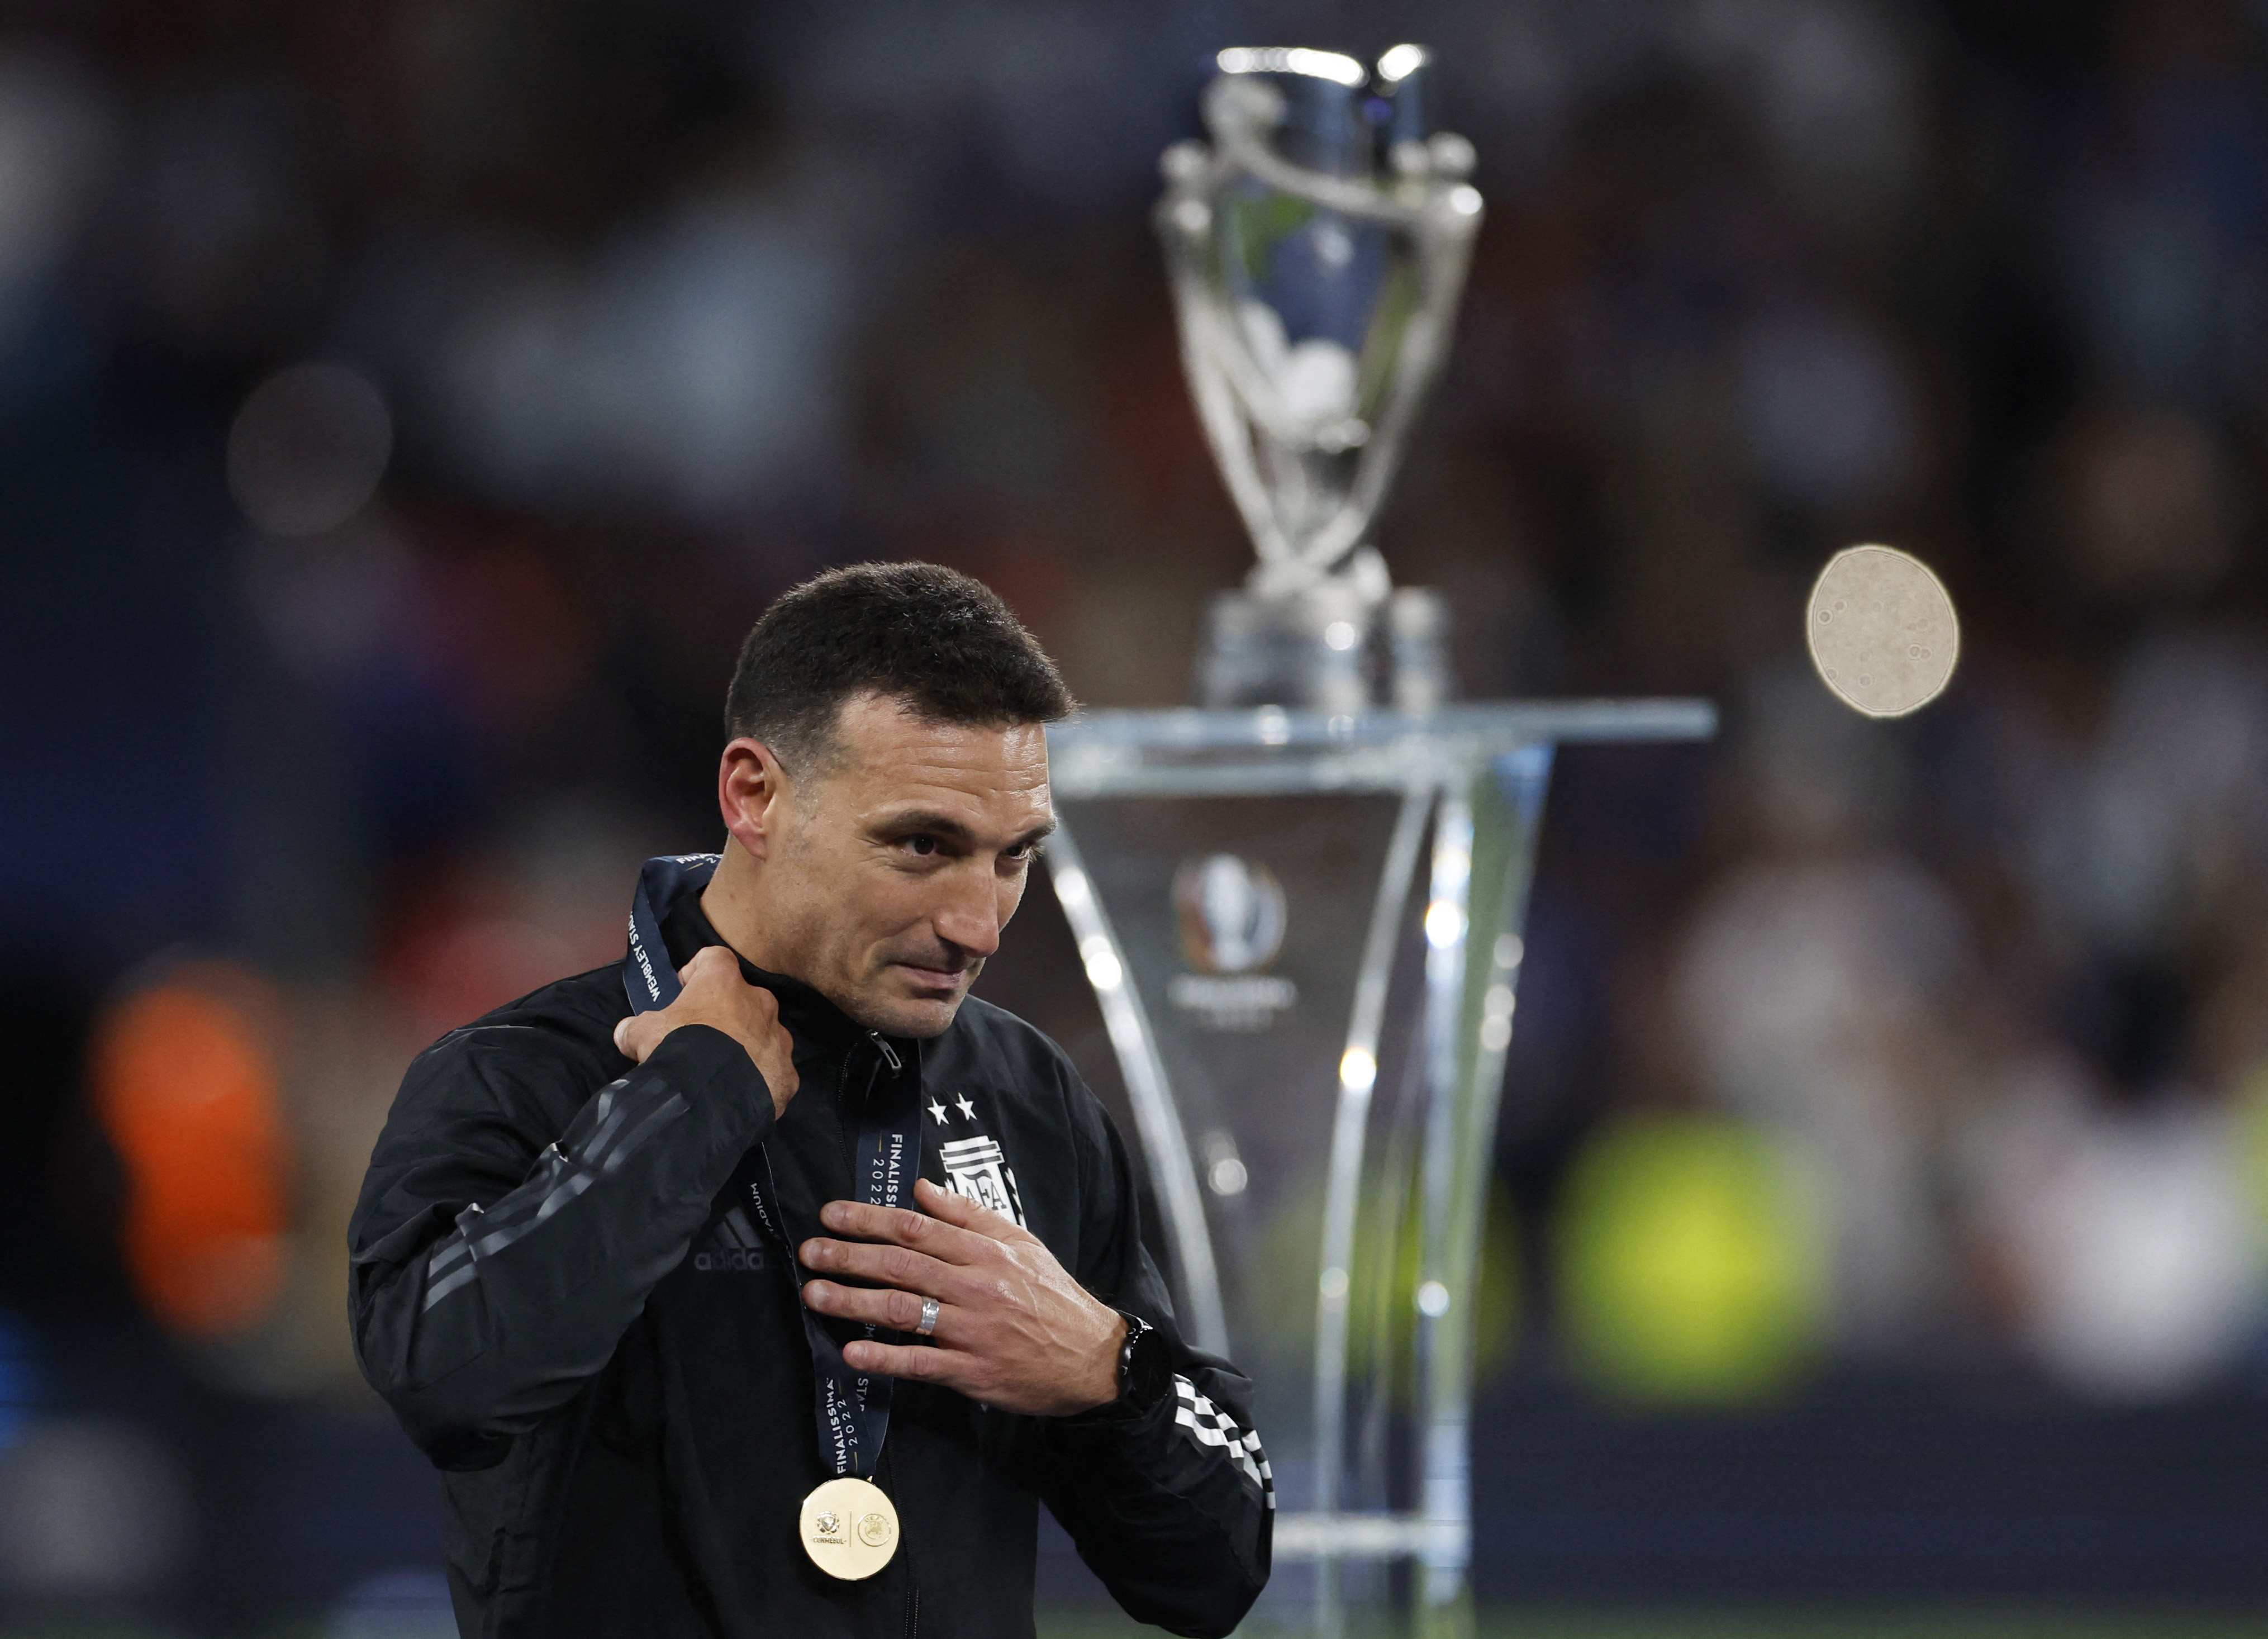 The Argentine coach, Lionel Scaloni, celebrates after winning the Finalissima at Wembley Stadium against Italy (REUTERS / Peter Cziborra)
